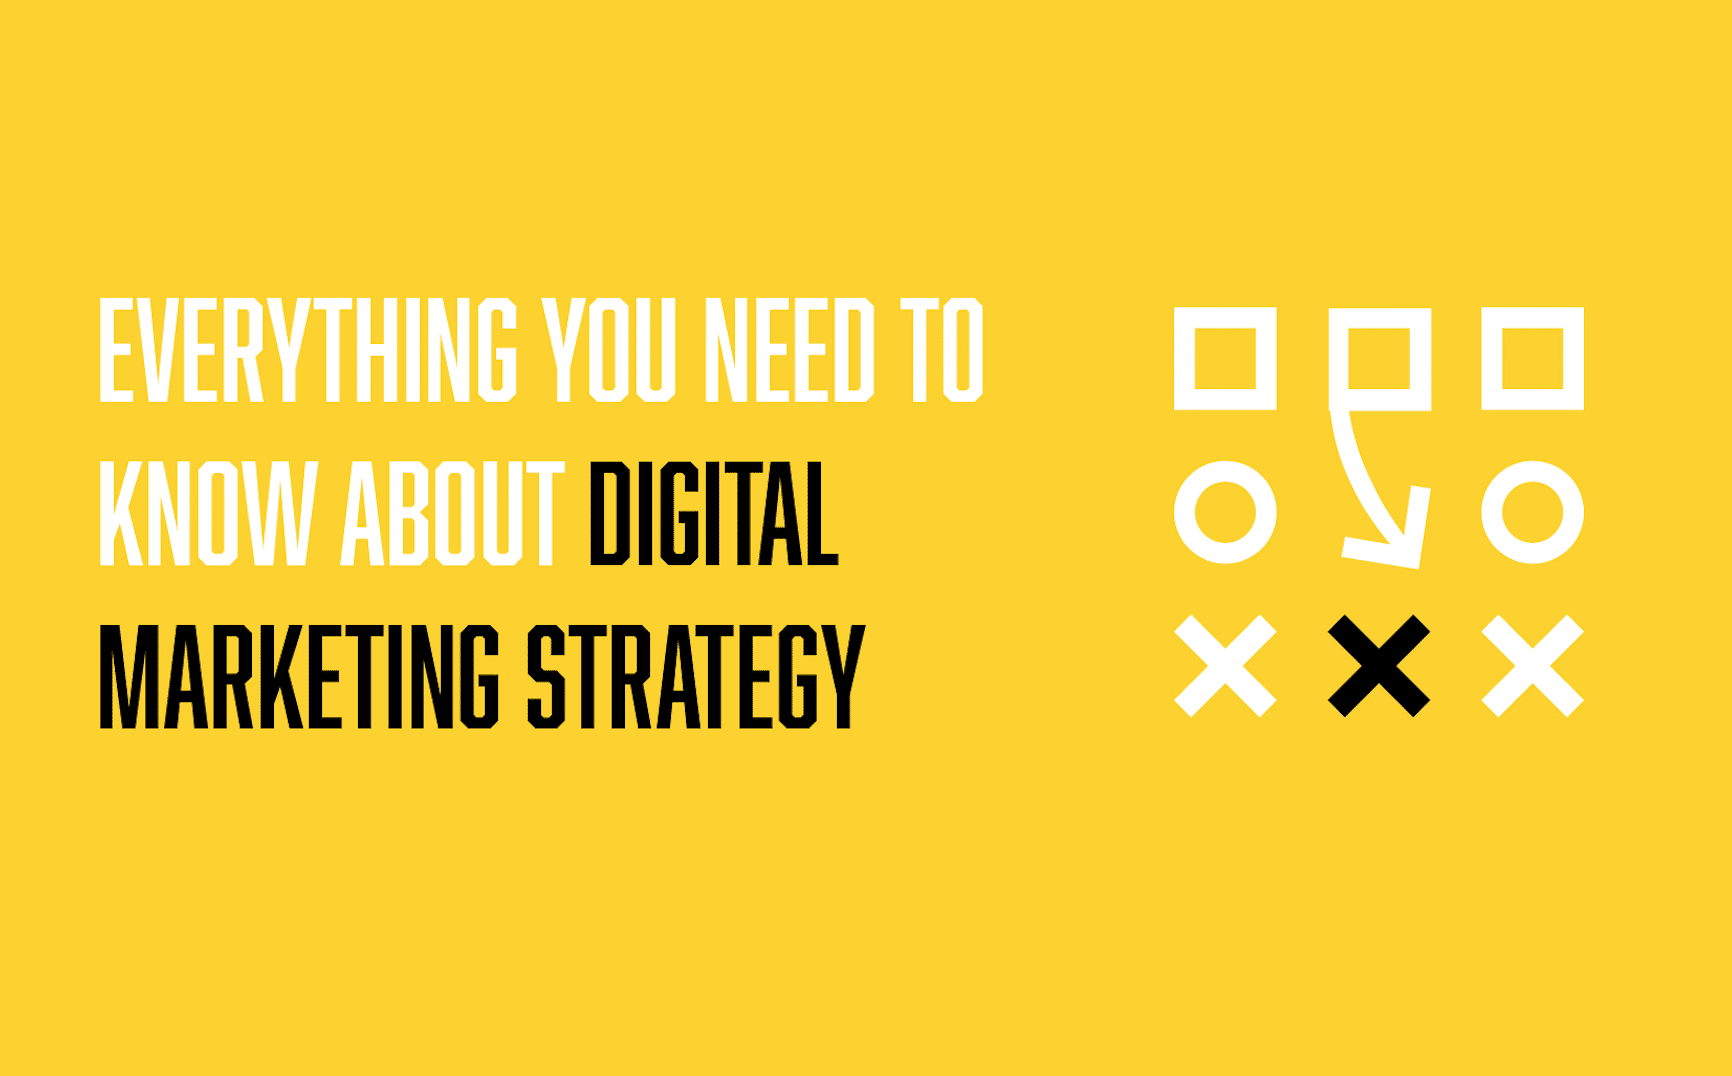 Everything You Need to Know About Digital Marketing Strategy